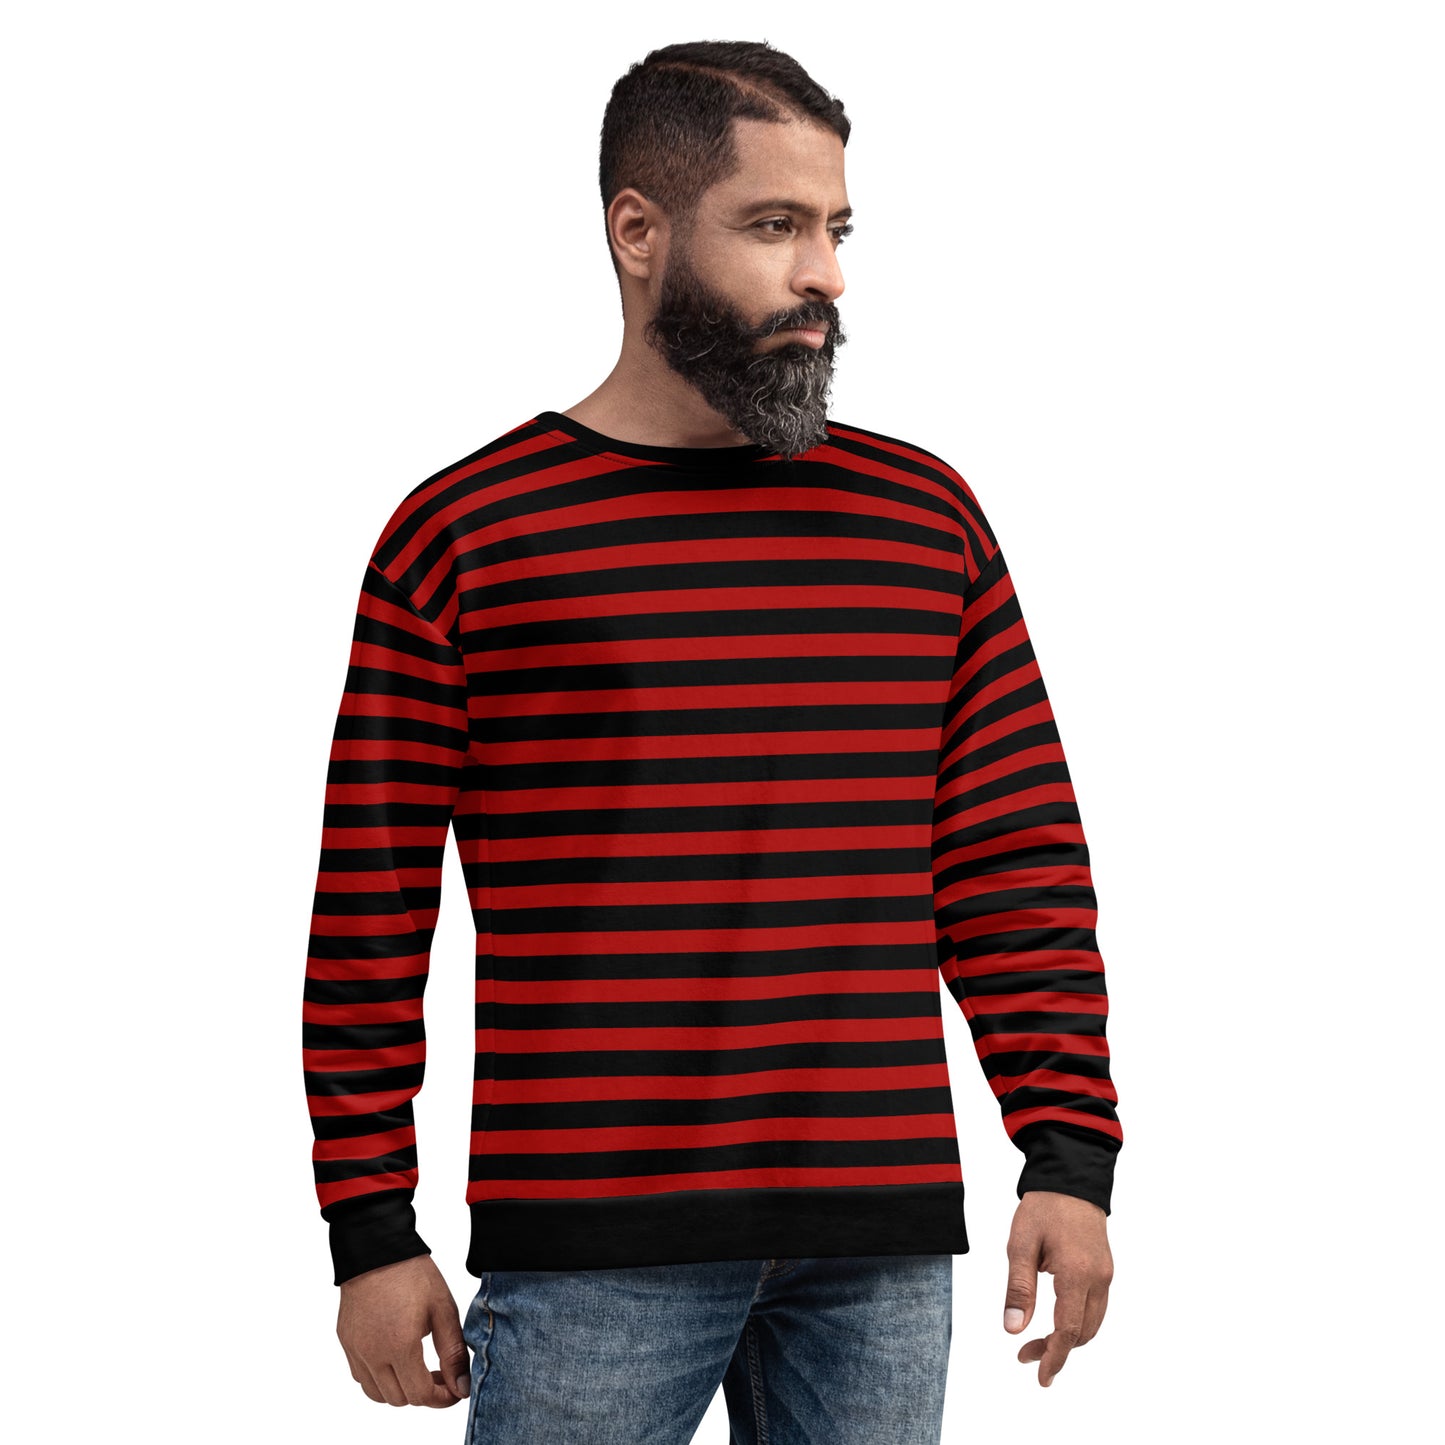 Iconic Red & Black Striped Knit: Sustainable Fashion Essential